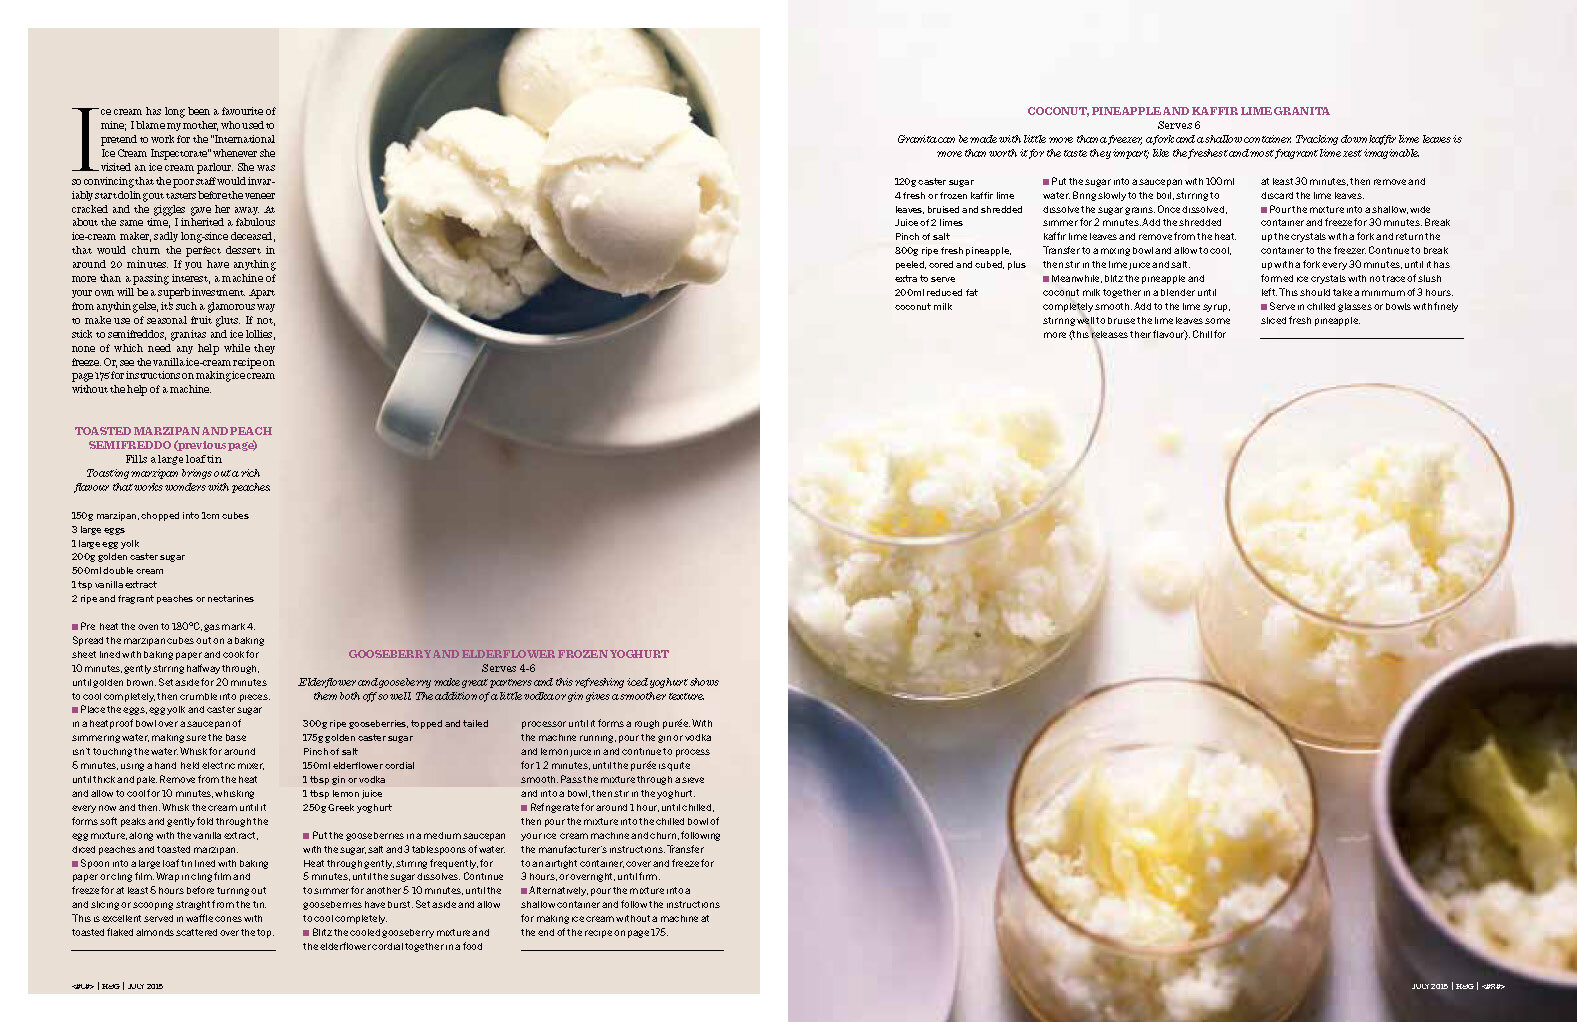 HG_Food for friends Ice cream_JULY15_CON_Page_2.jpg